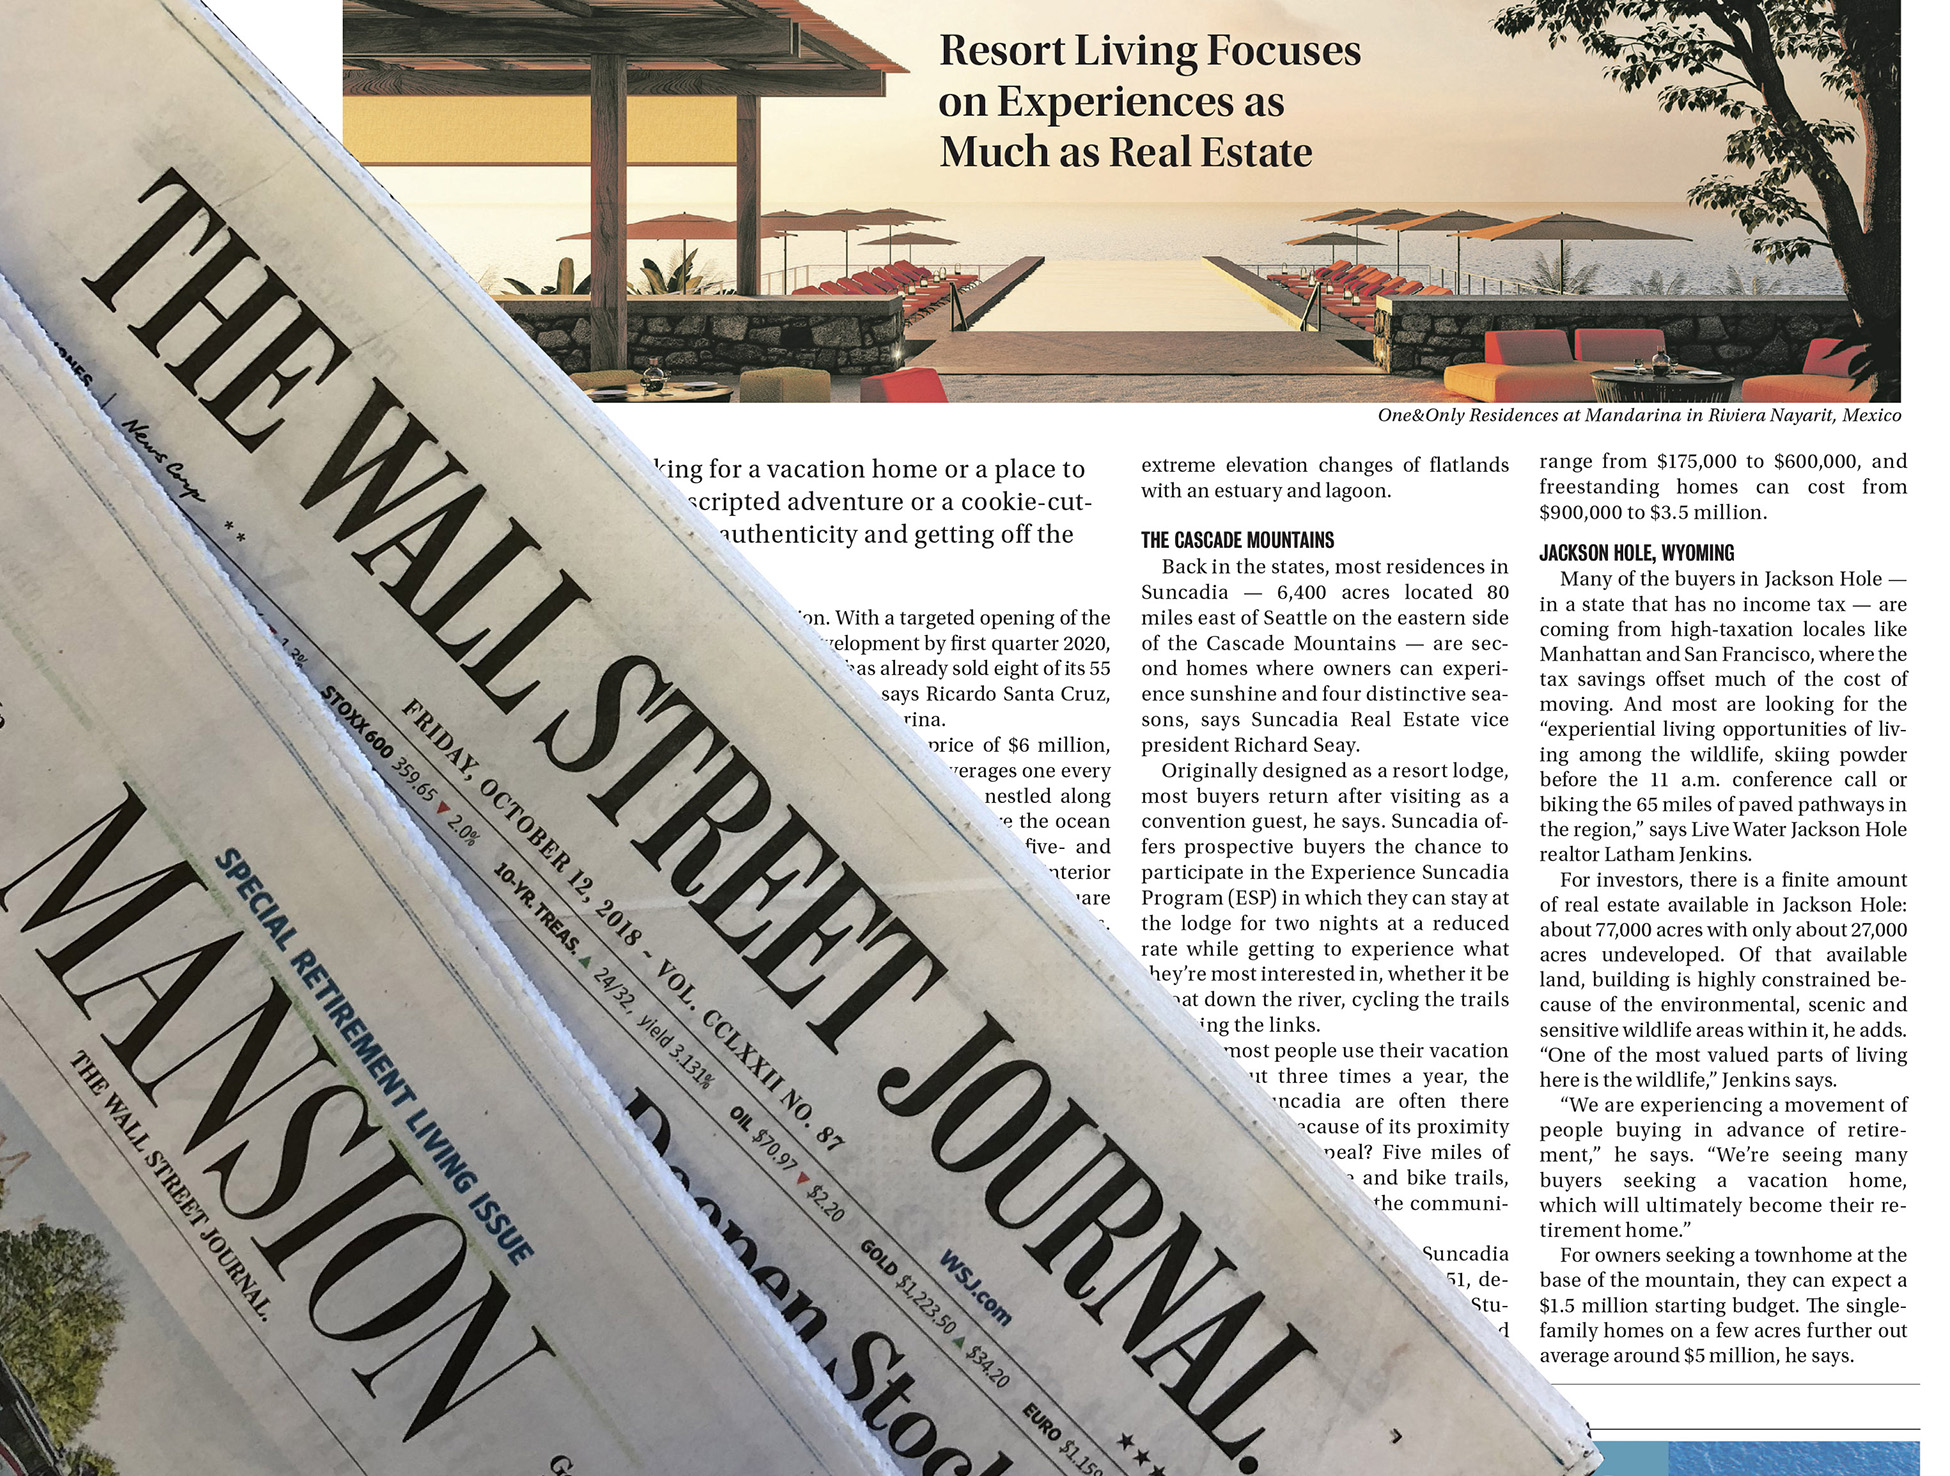 Resort Living Focuses on Experiences as Much as Real Estate, published in the Wall Street Journal, Oct 12, 2018